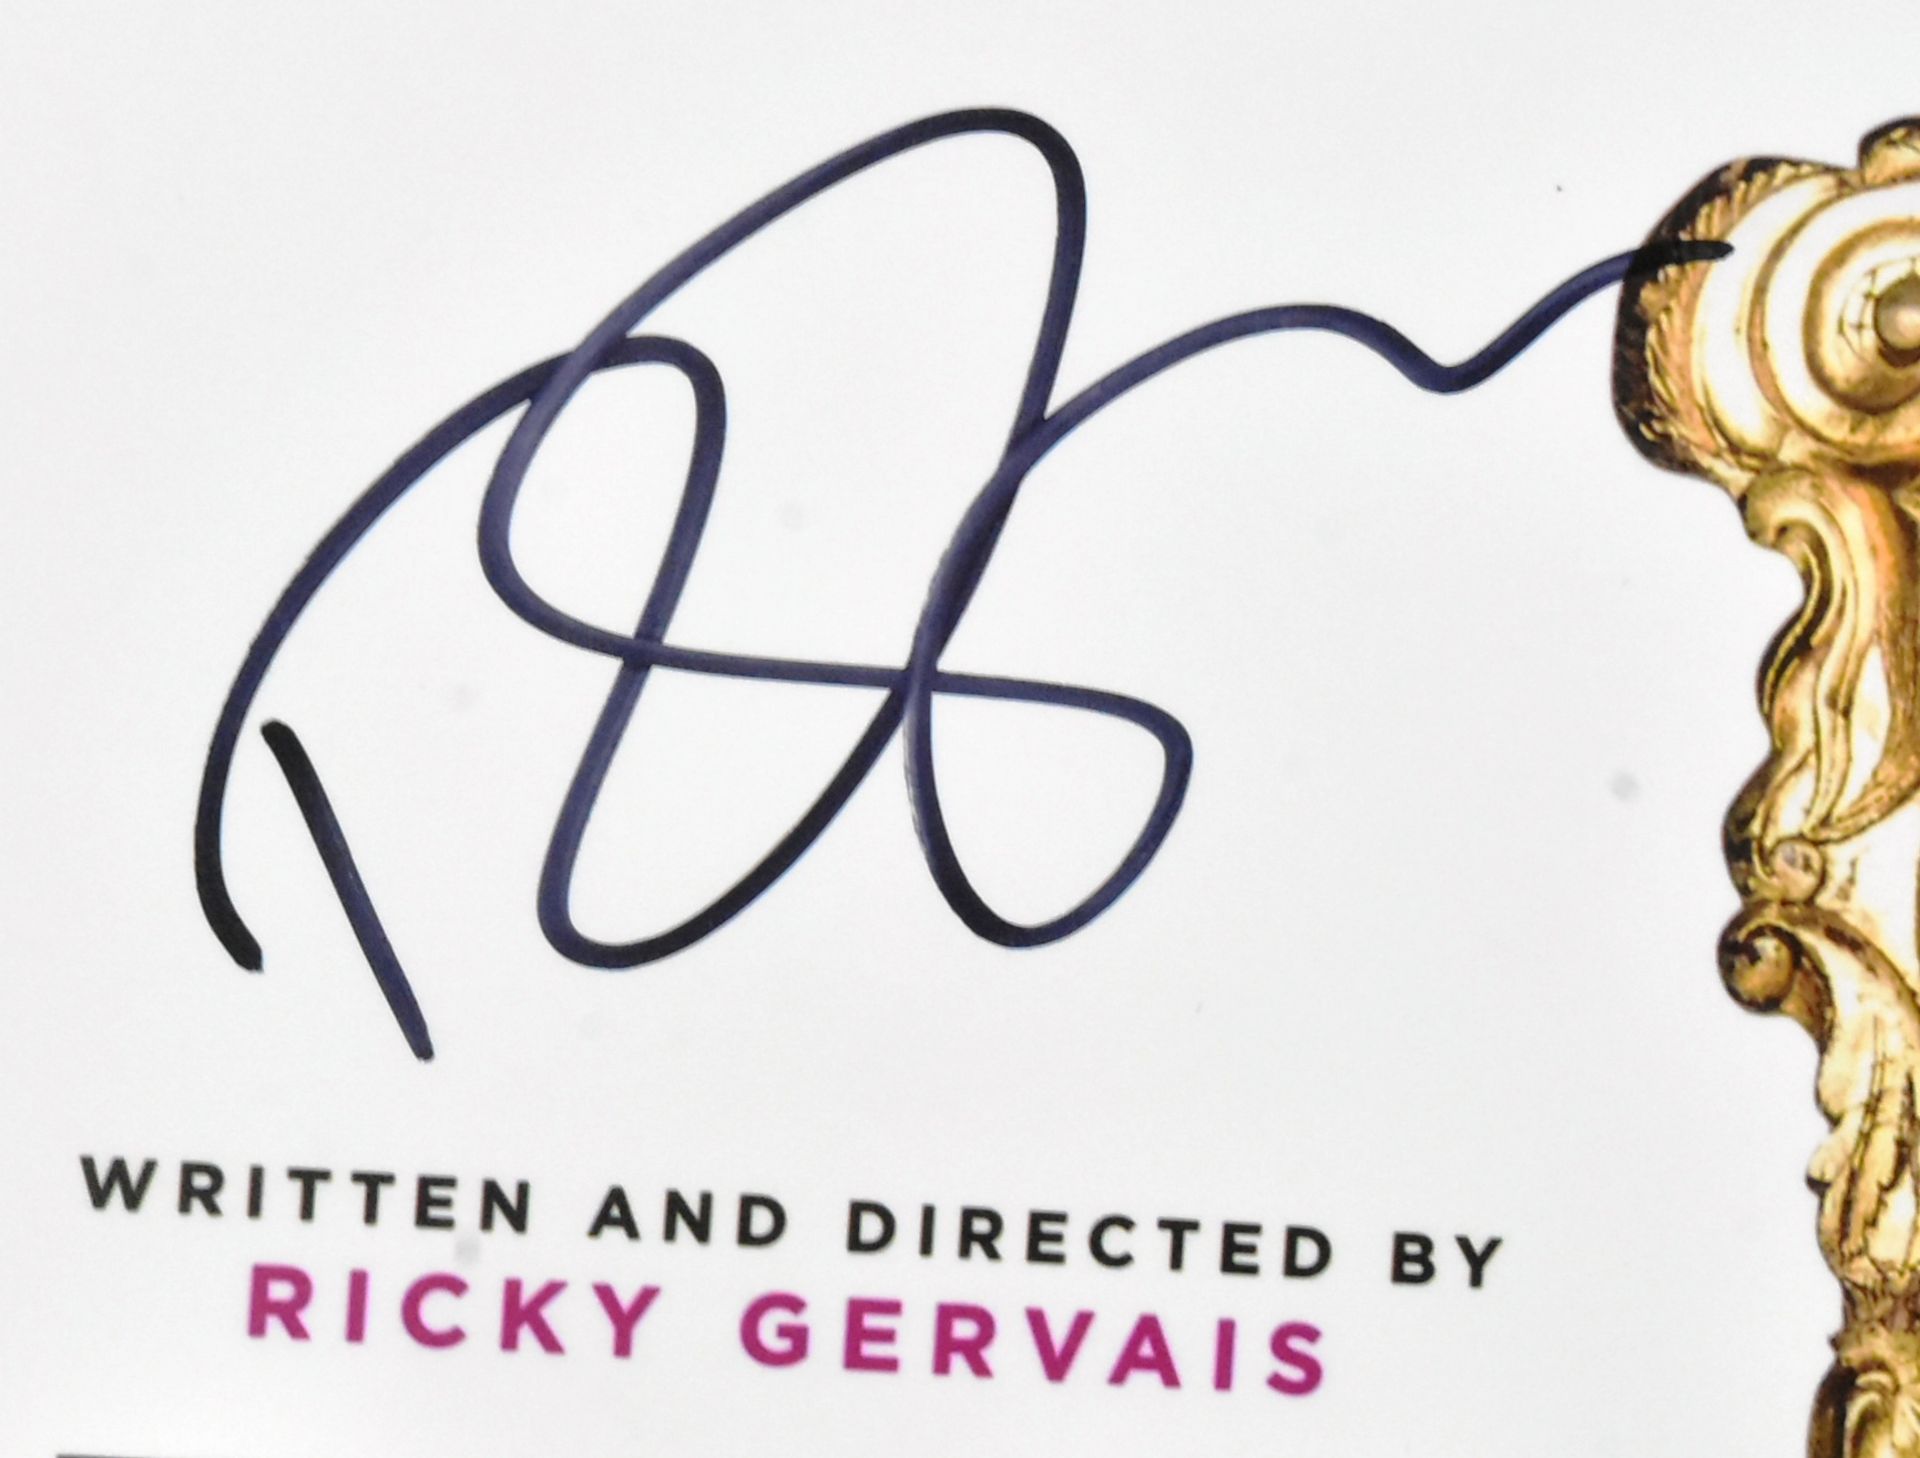 DAVID BRENT LIFE ON THE ROAD - RICKY GERVAIS - SIGNED PHOTOGRAPH - Image 2 of 2